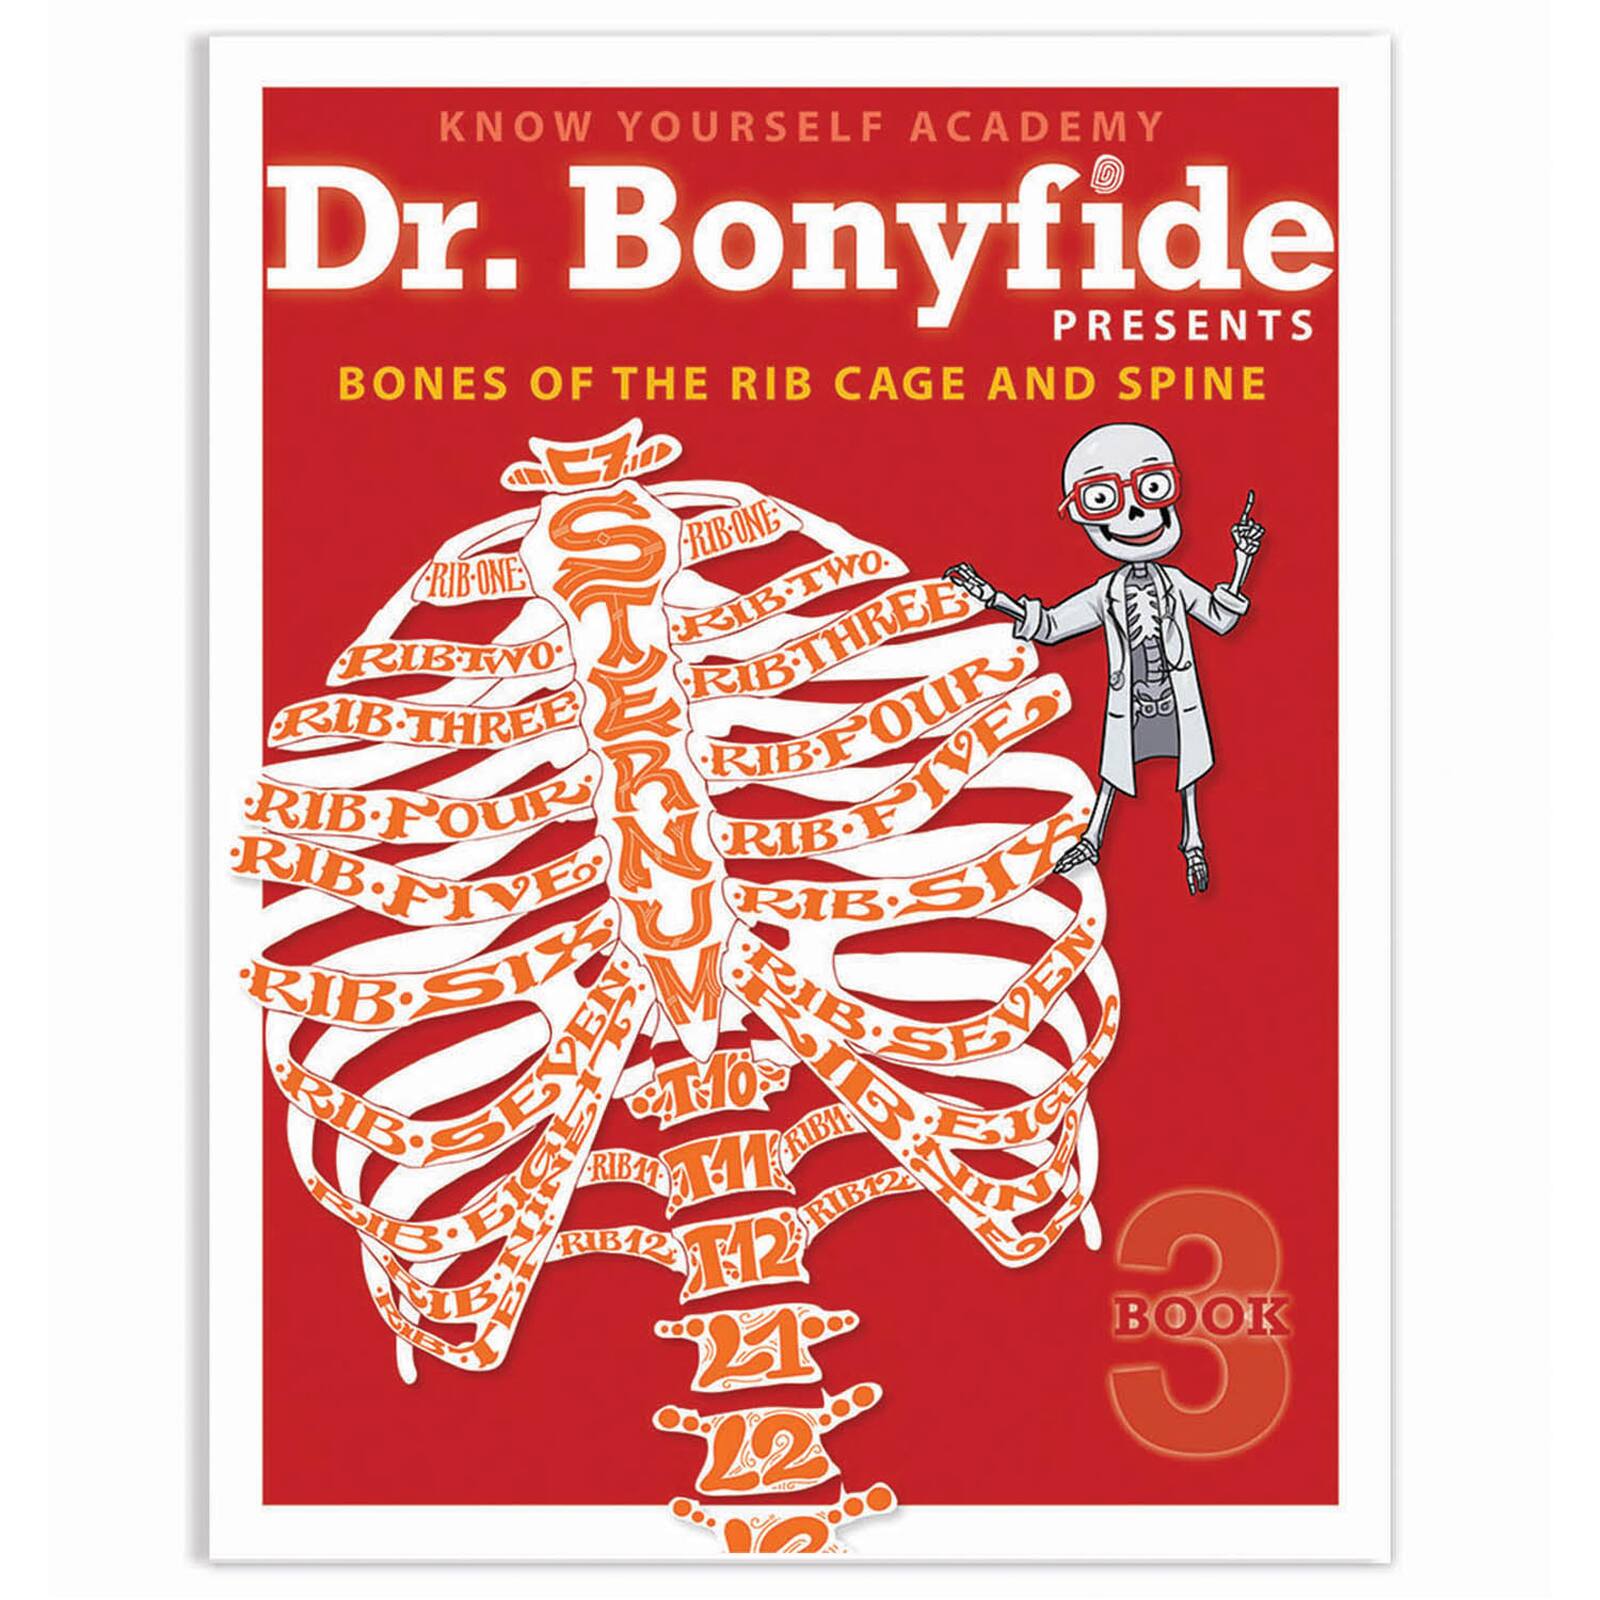 Know Yourself 4 Book Set: Dr. Bonyfide Presents 206 Bones of the Human Body